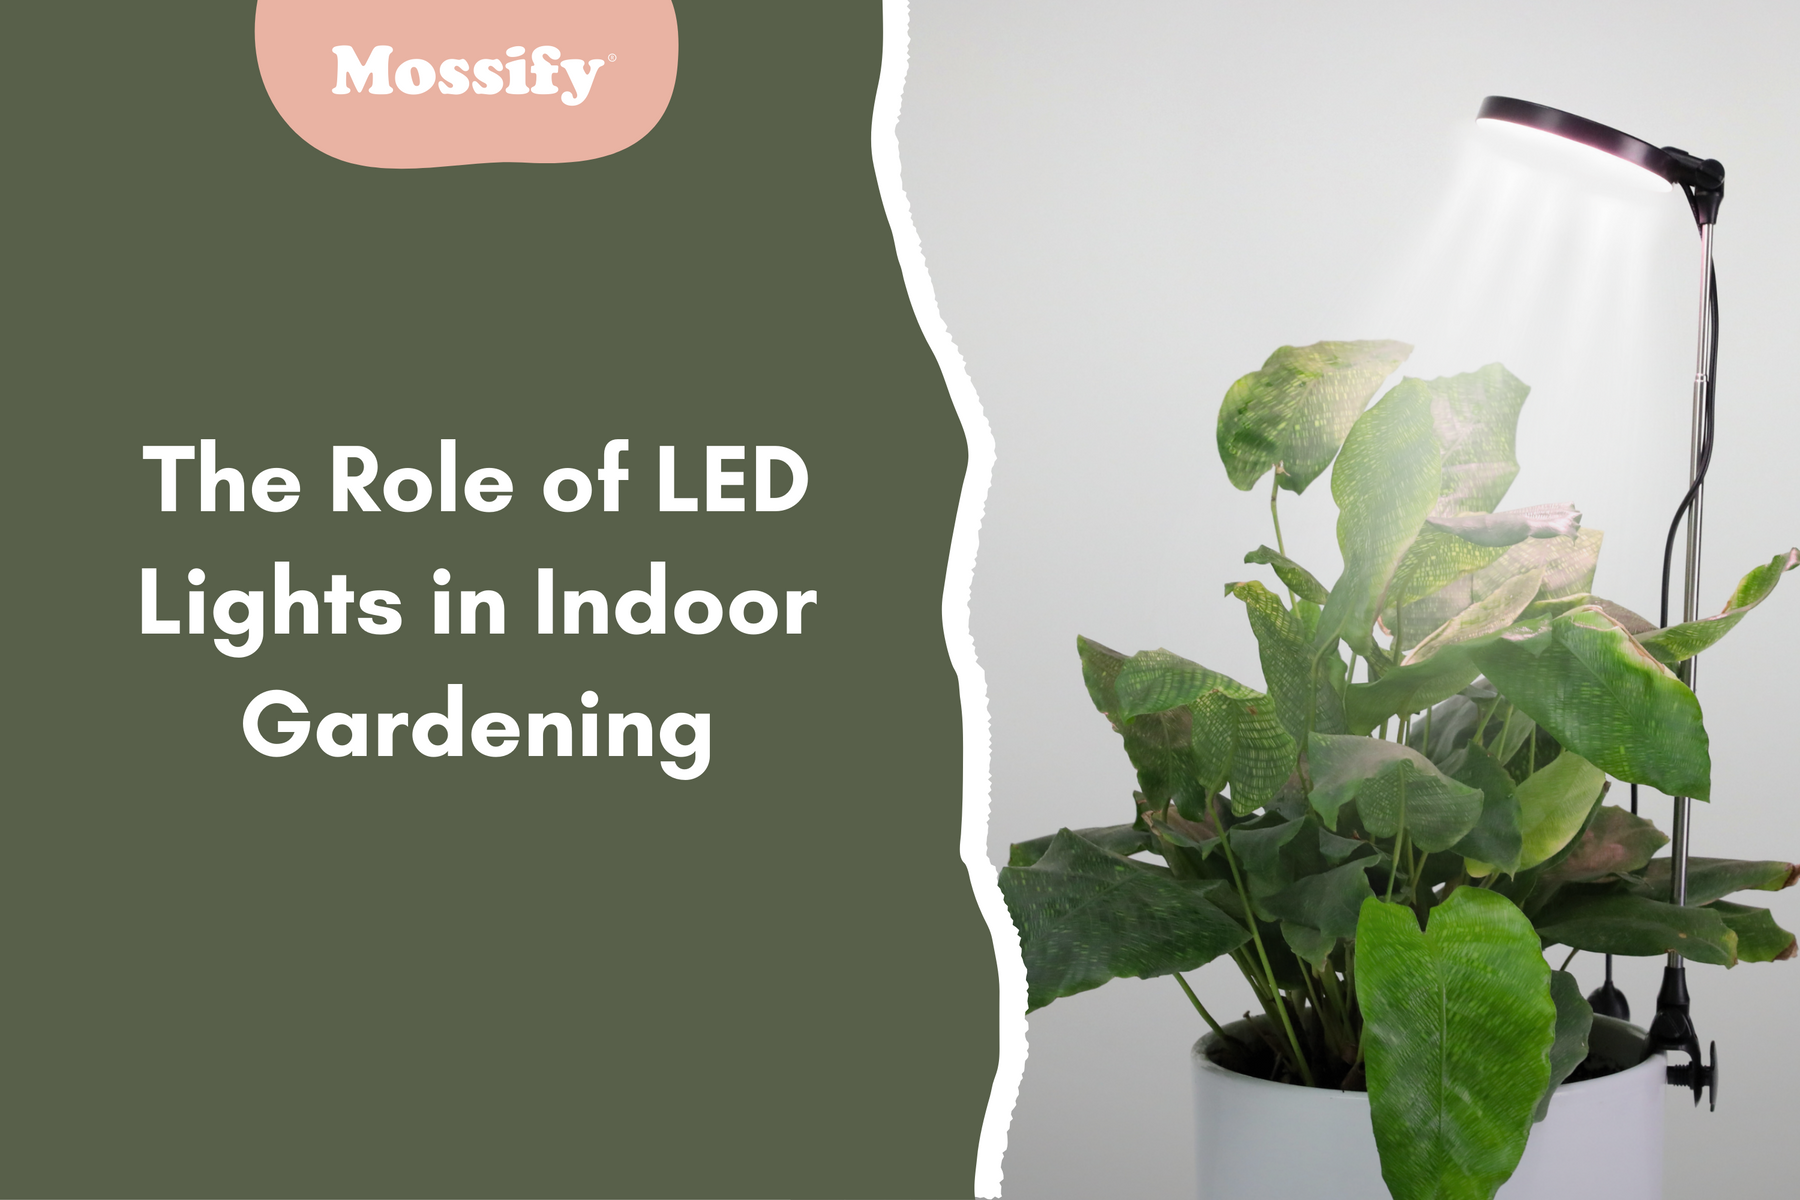 The Role of LED Lights in Indoor Gardening